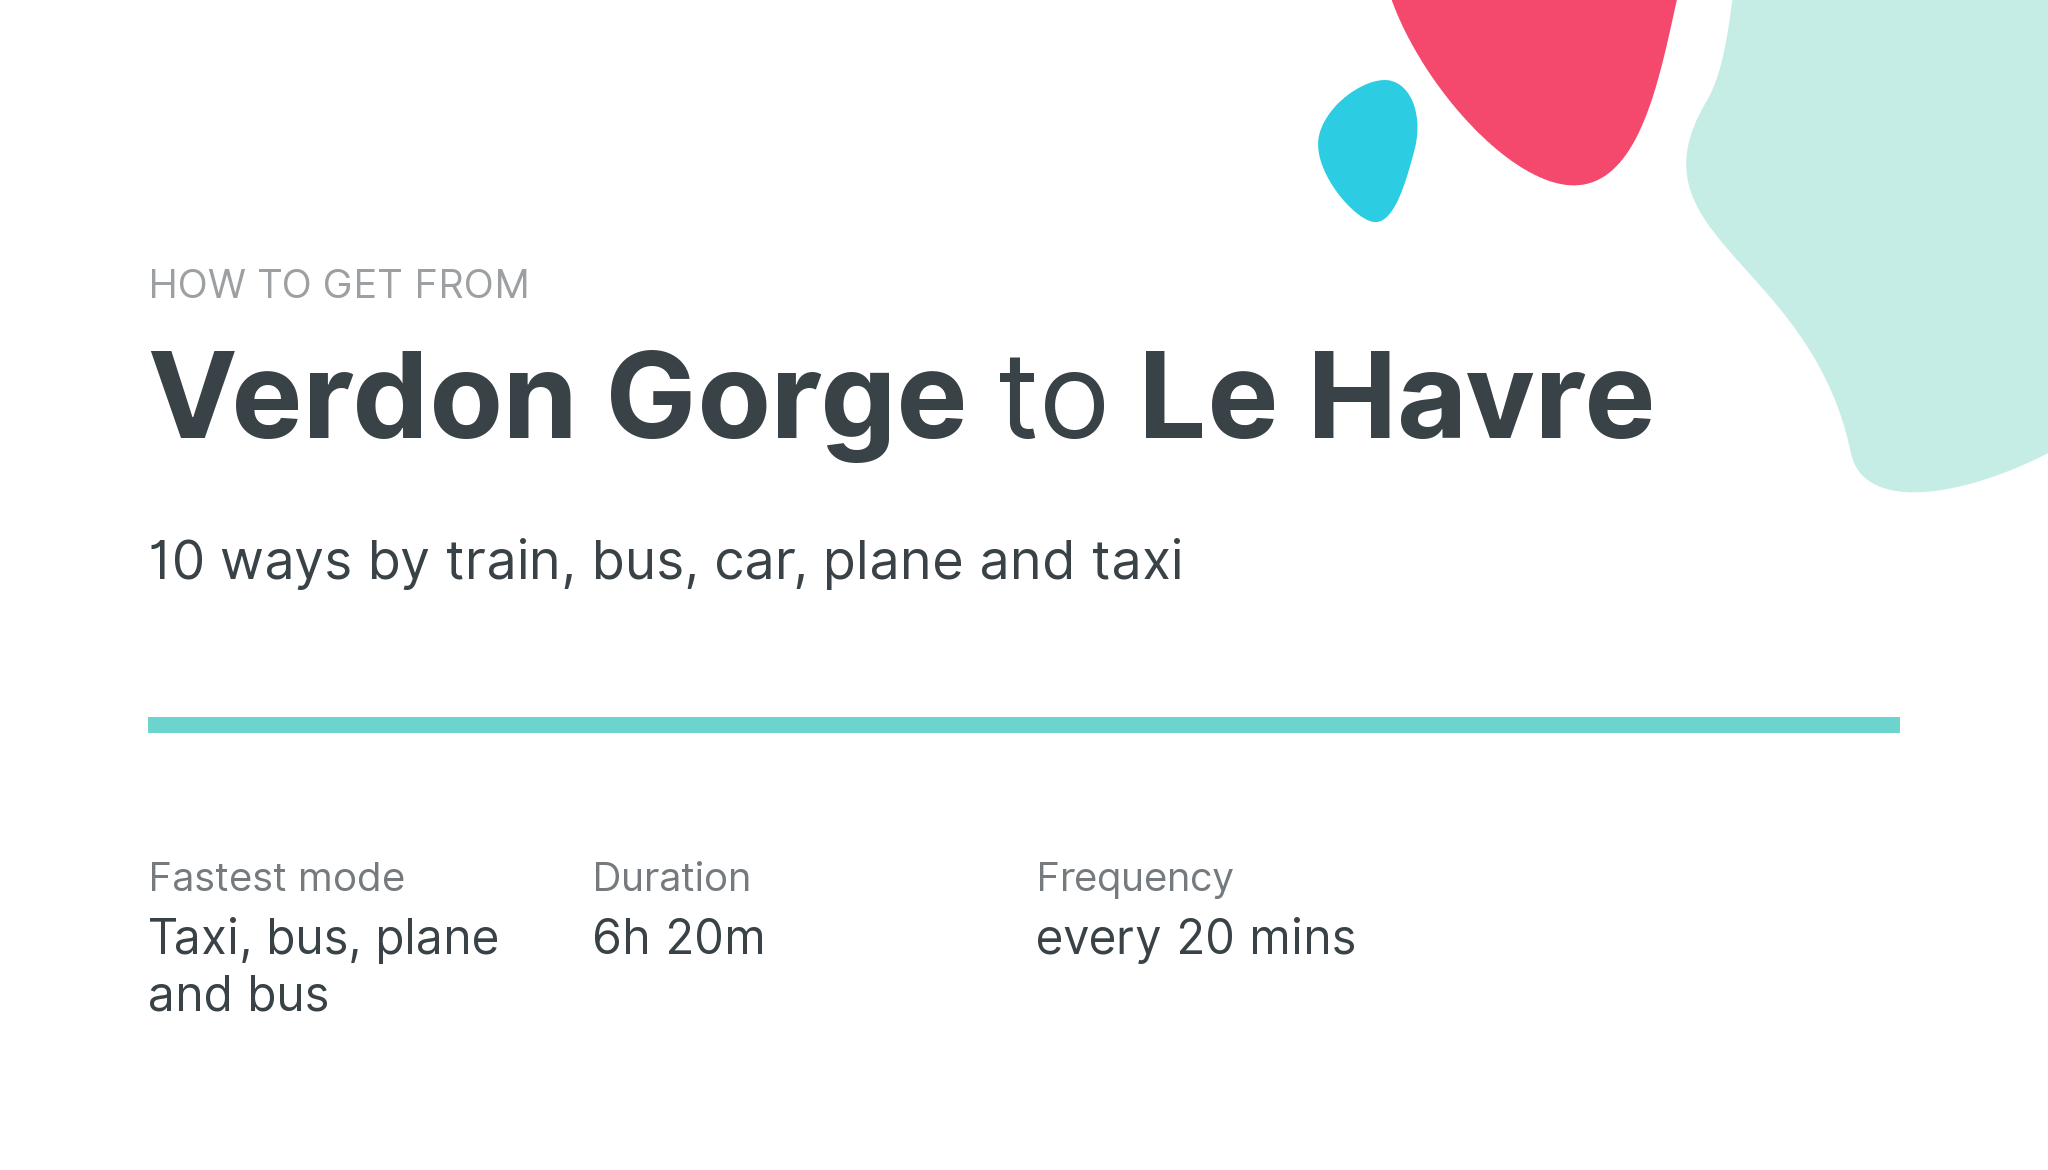 How do I get from Verdon Gorge to Le Havre